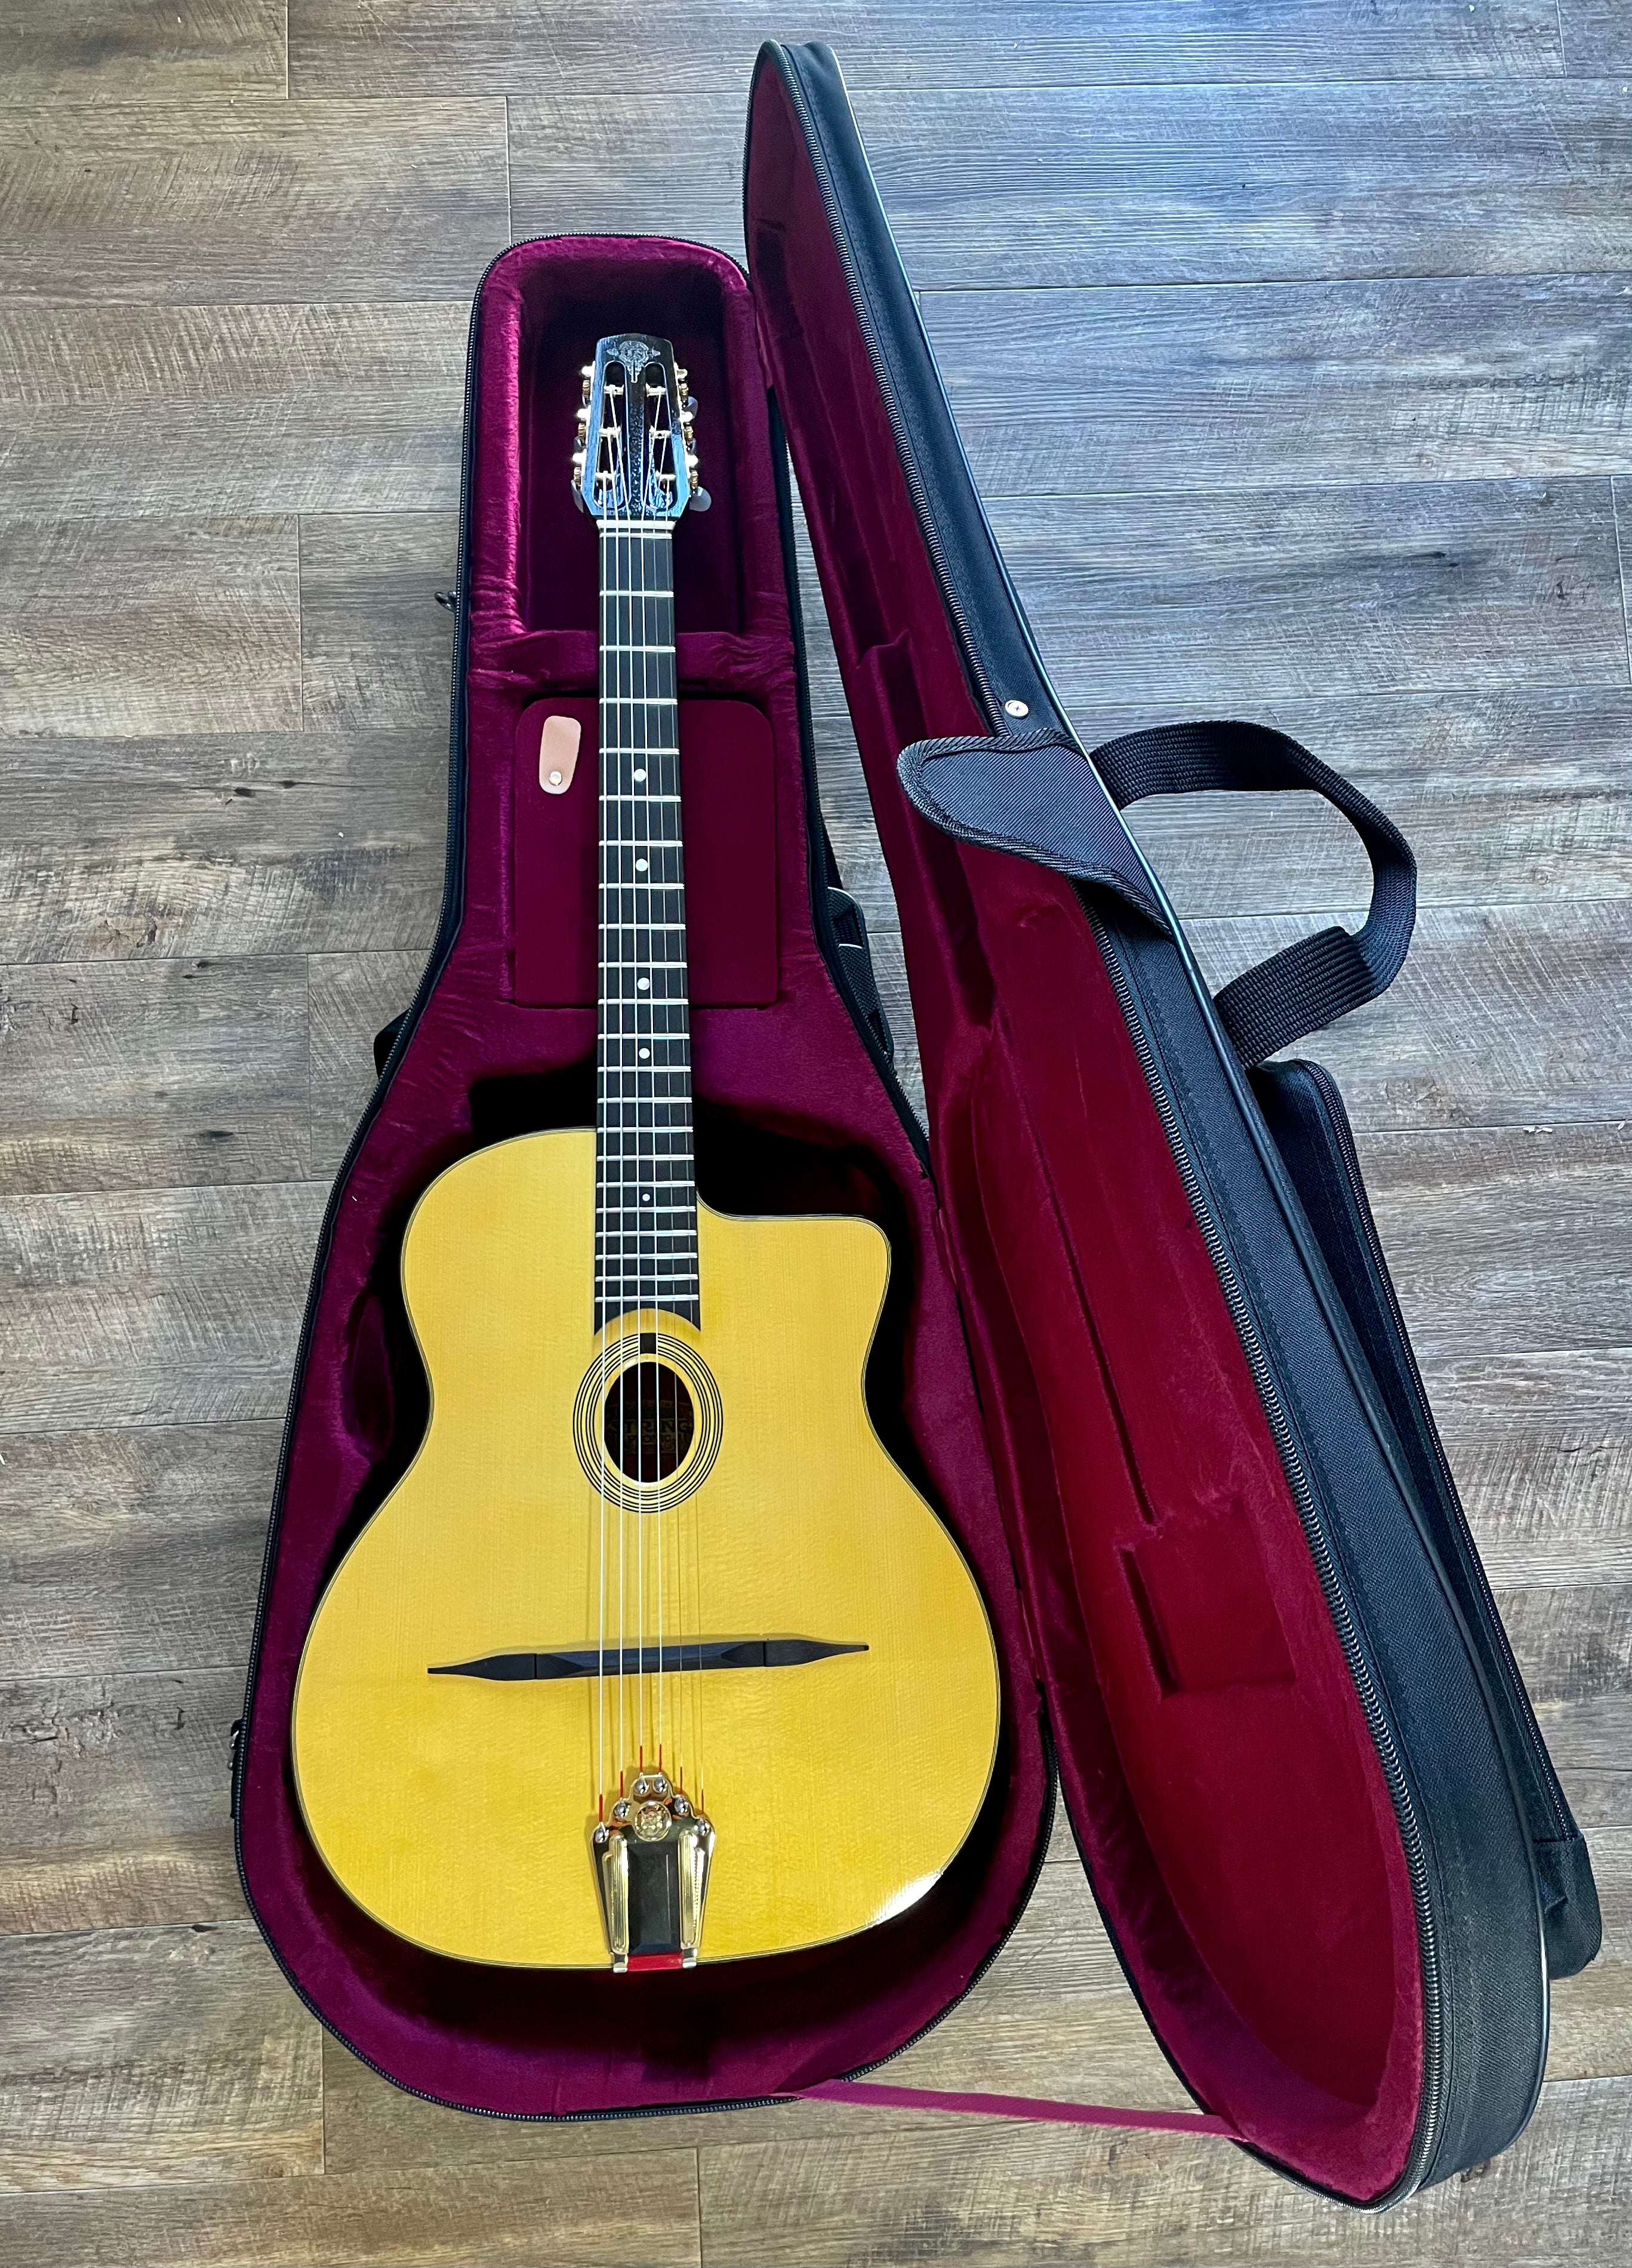 Stringphonic Advanced with Brazilian Rosewood and Heat Bent Pliage!